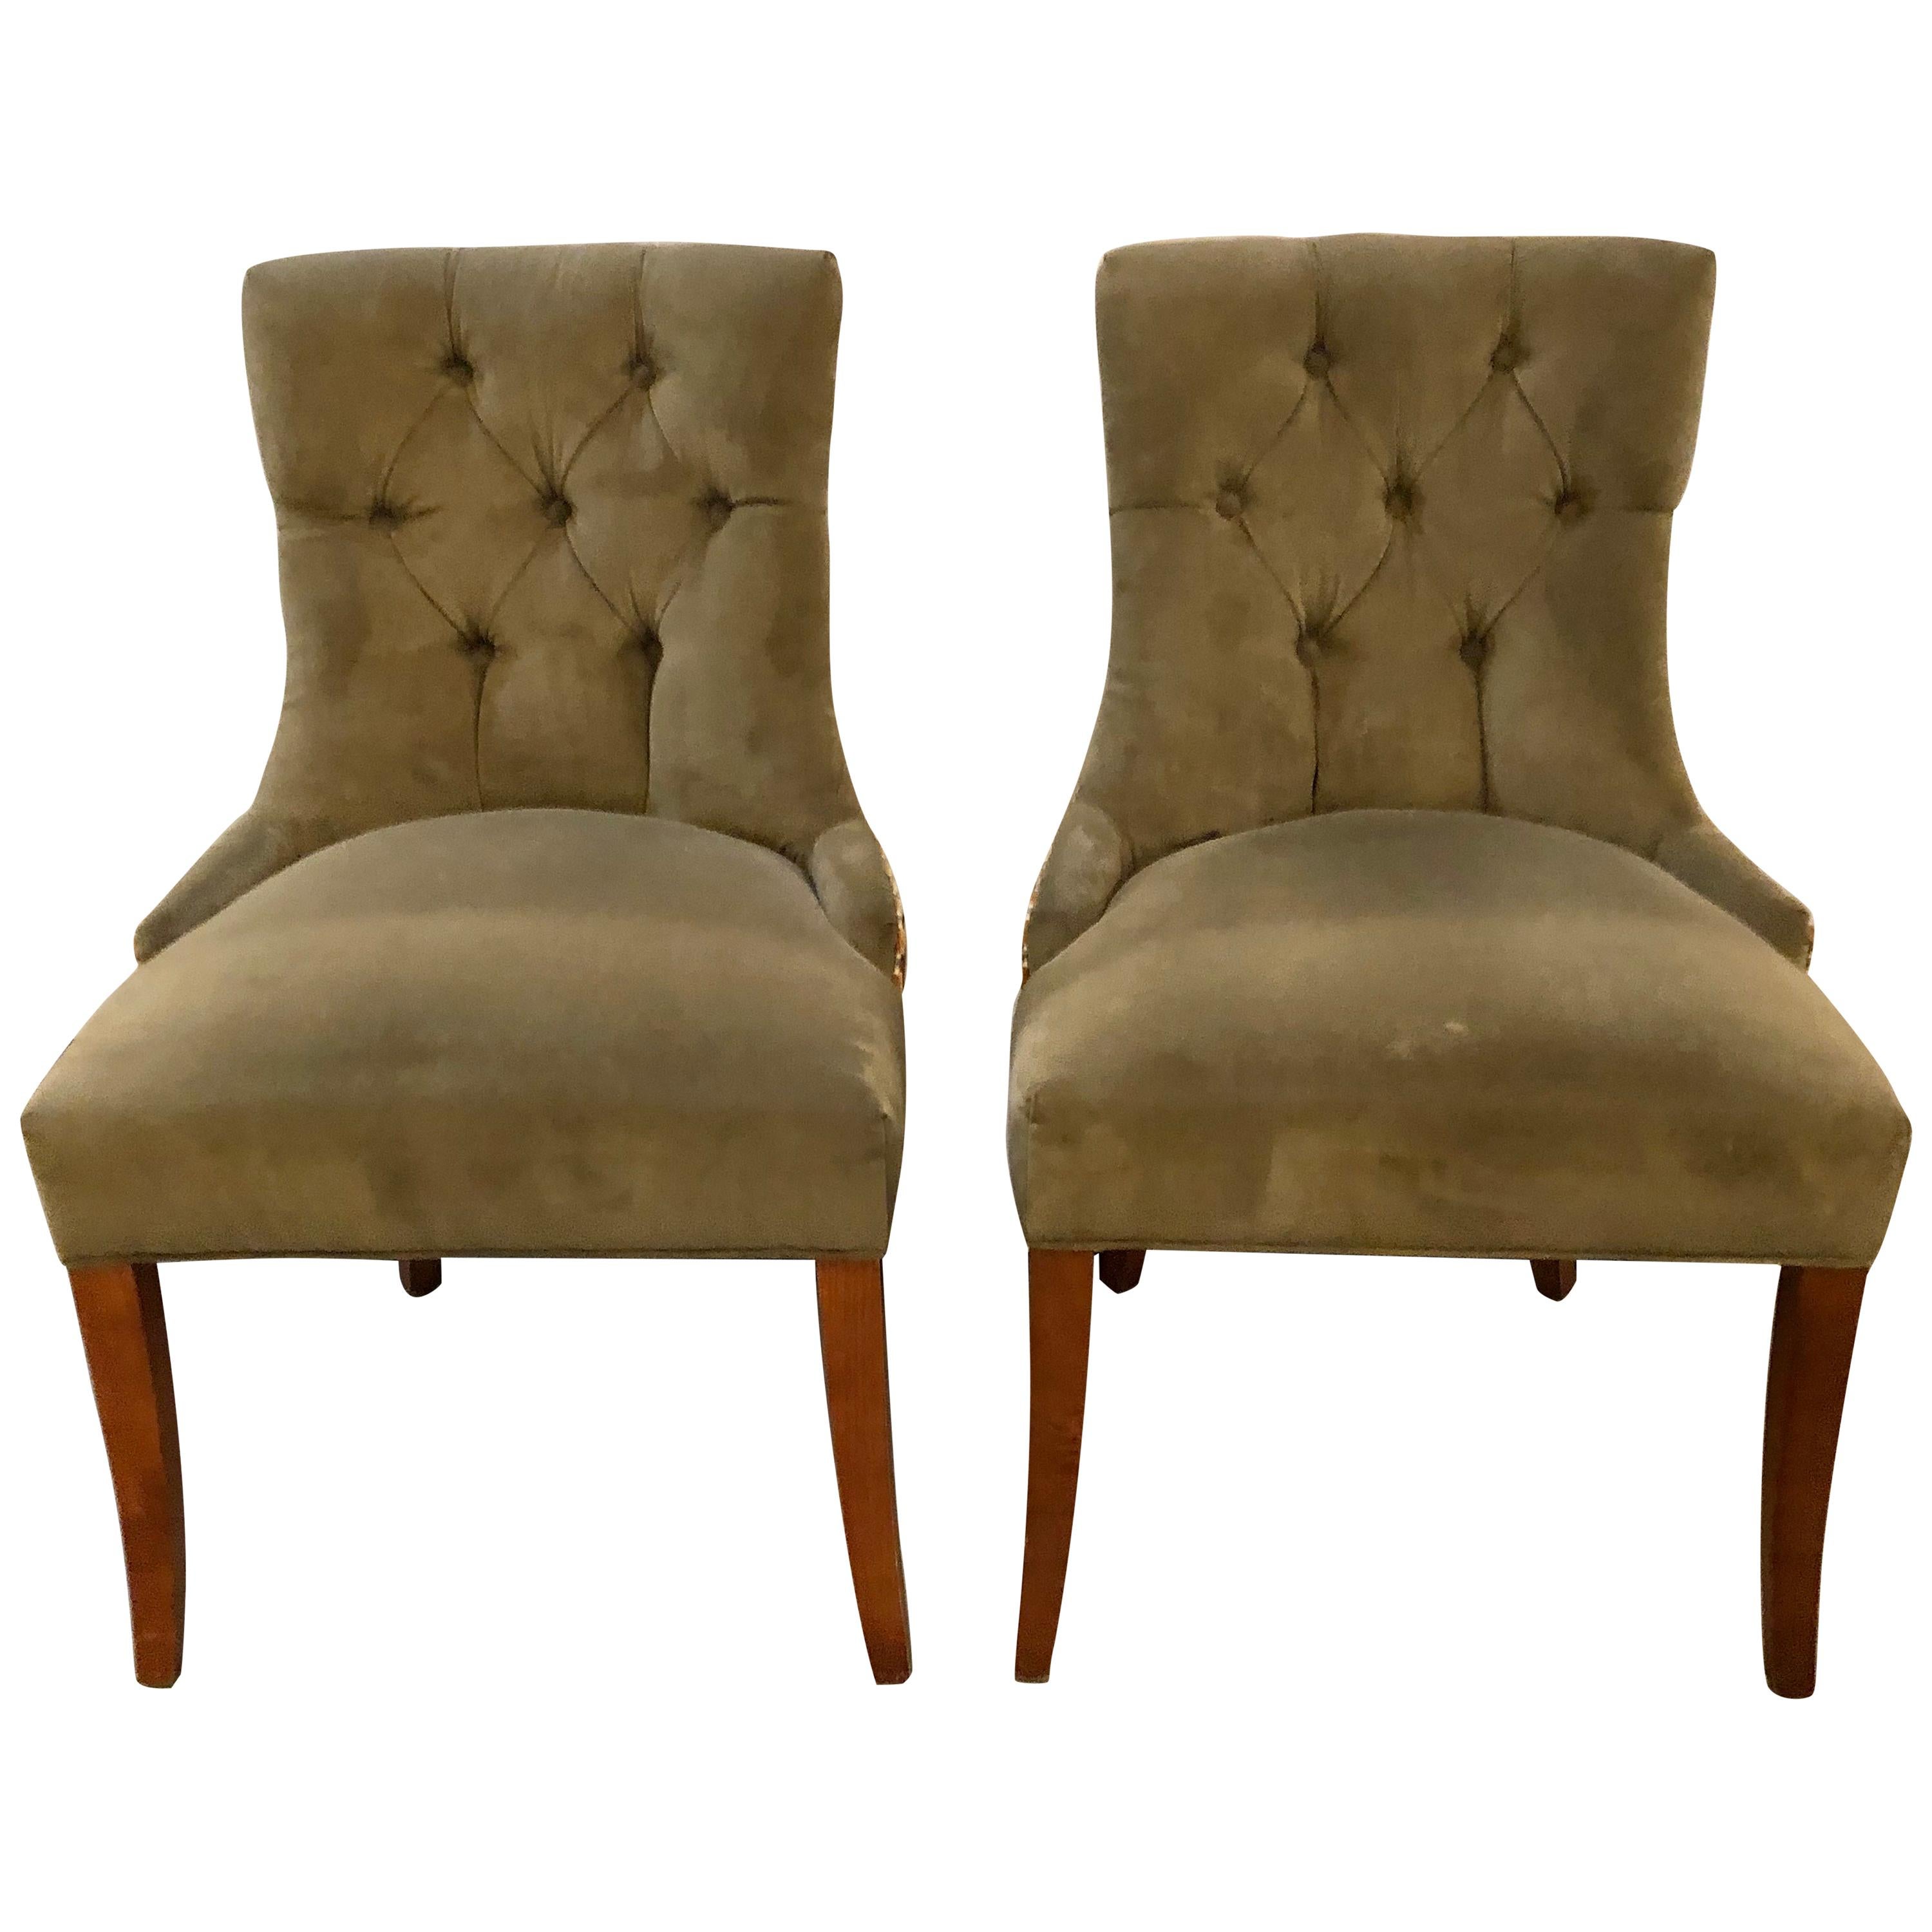 Pair of Custom Quality Finely Upholstered Side / Desk Chairs